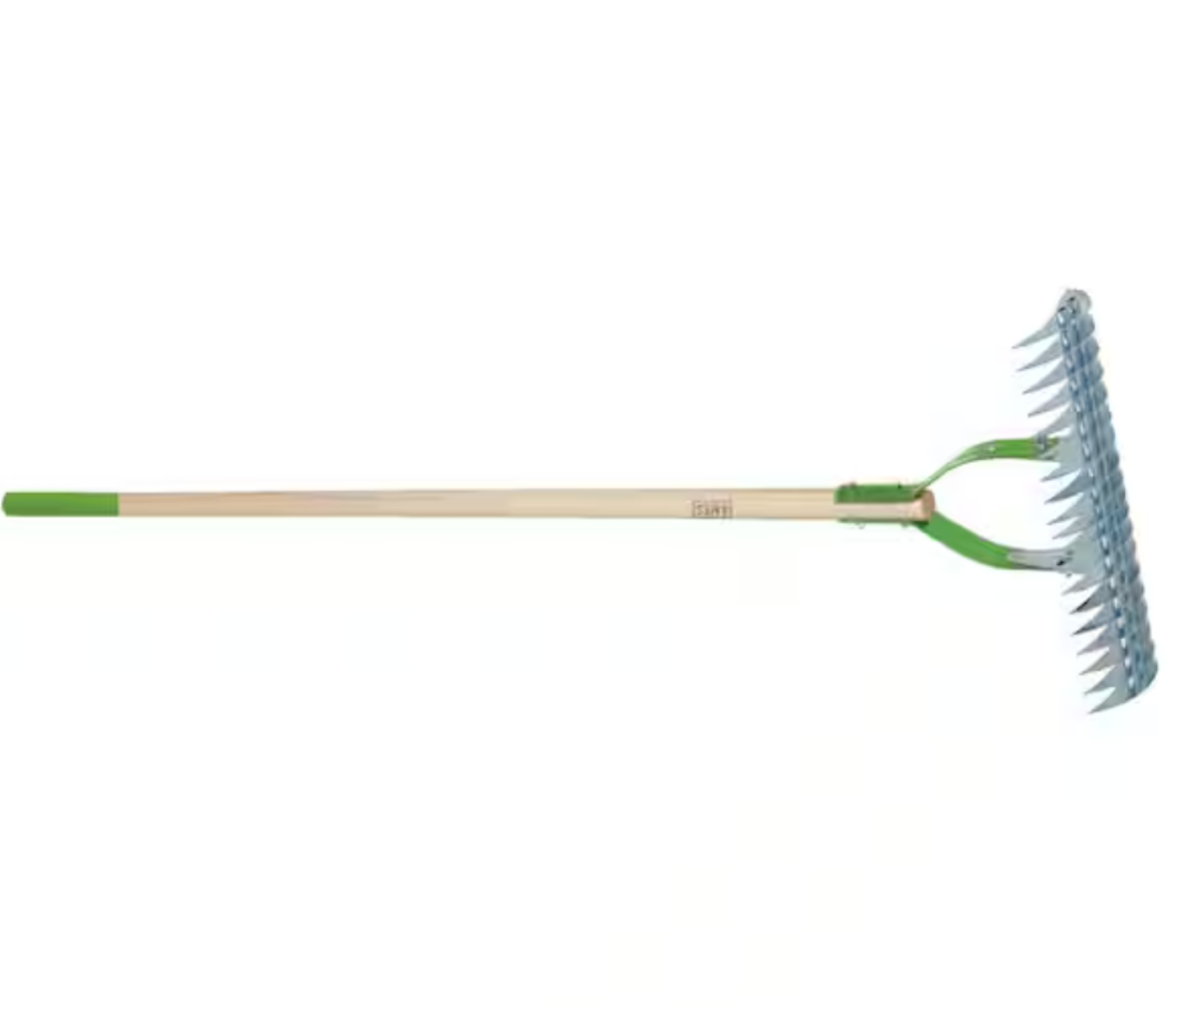 Ames 54. in Hardwood Handle Thatch Rake with green head and wooden handle.